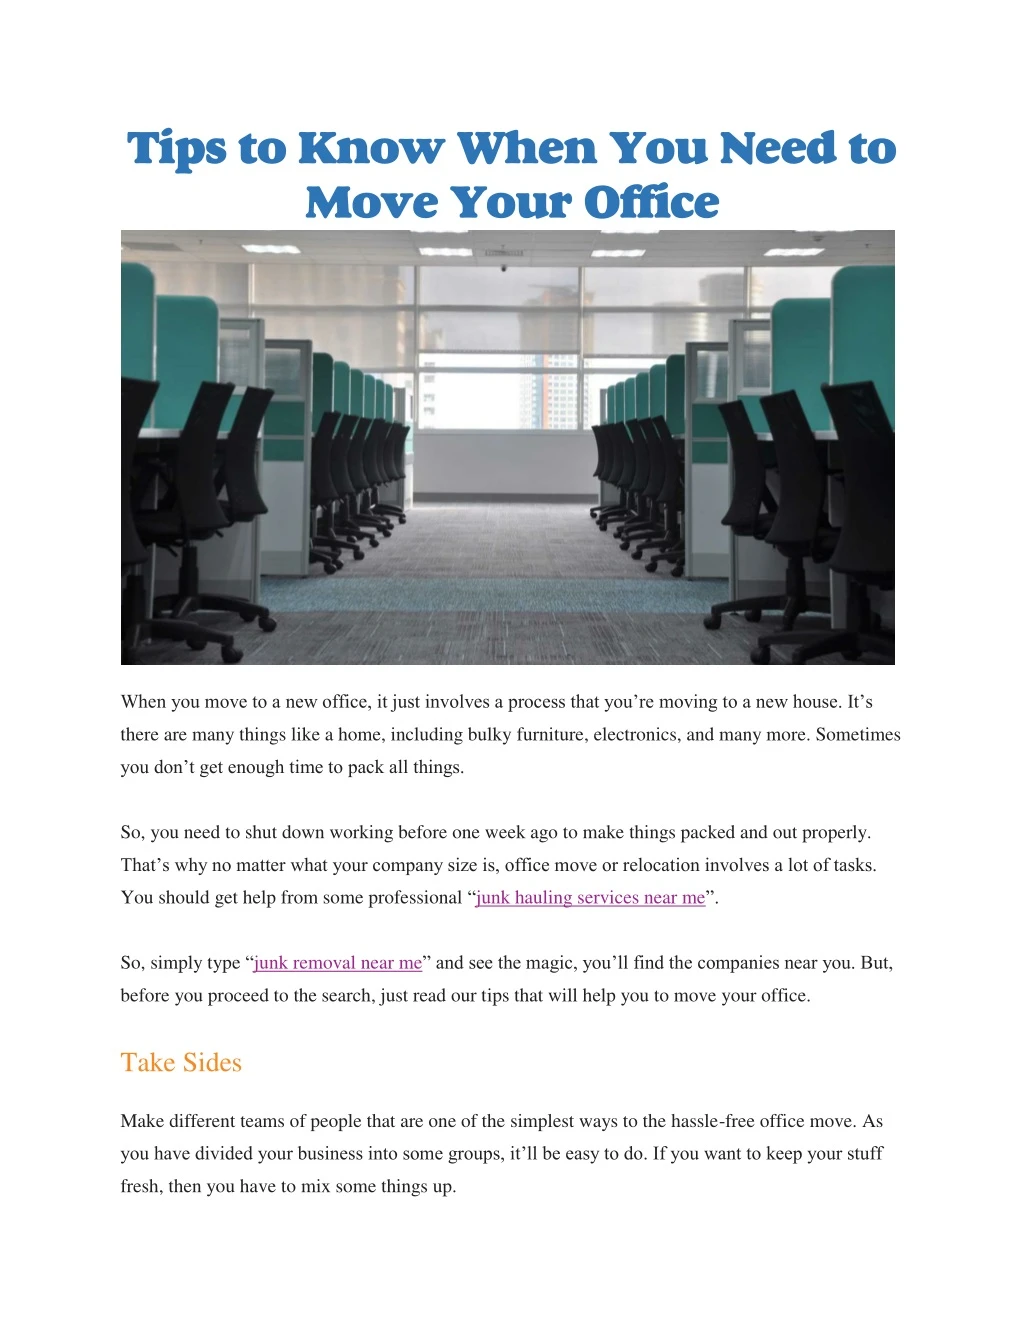 tips to know when you need to move your office